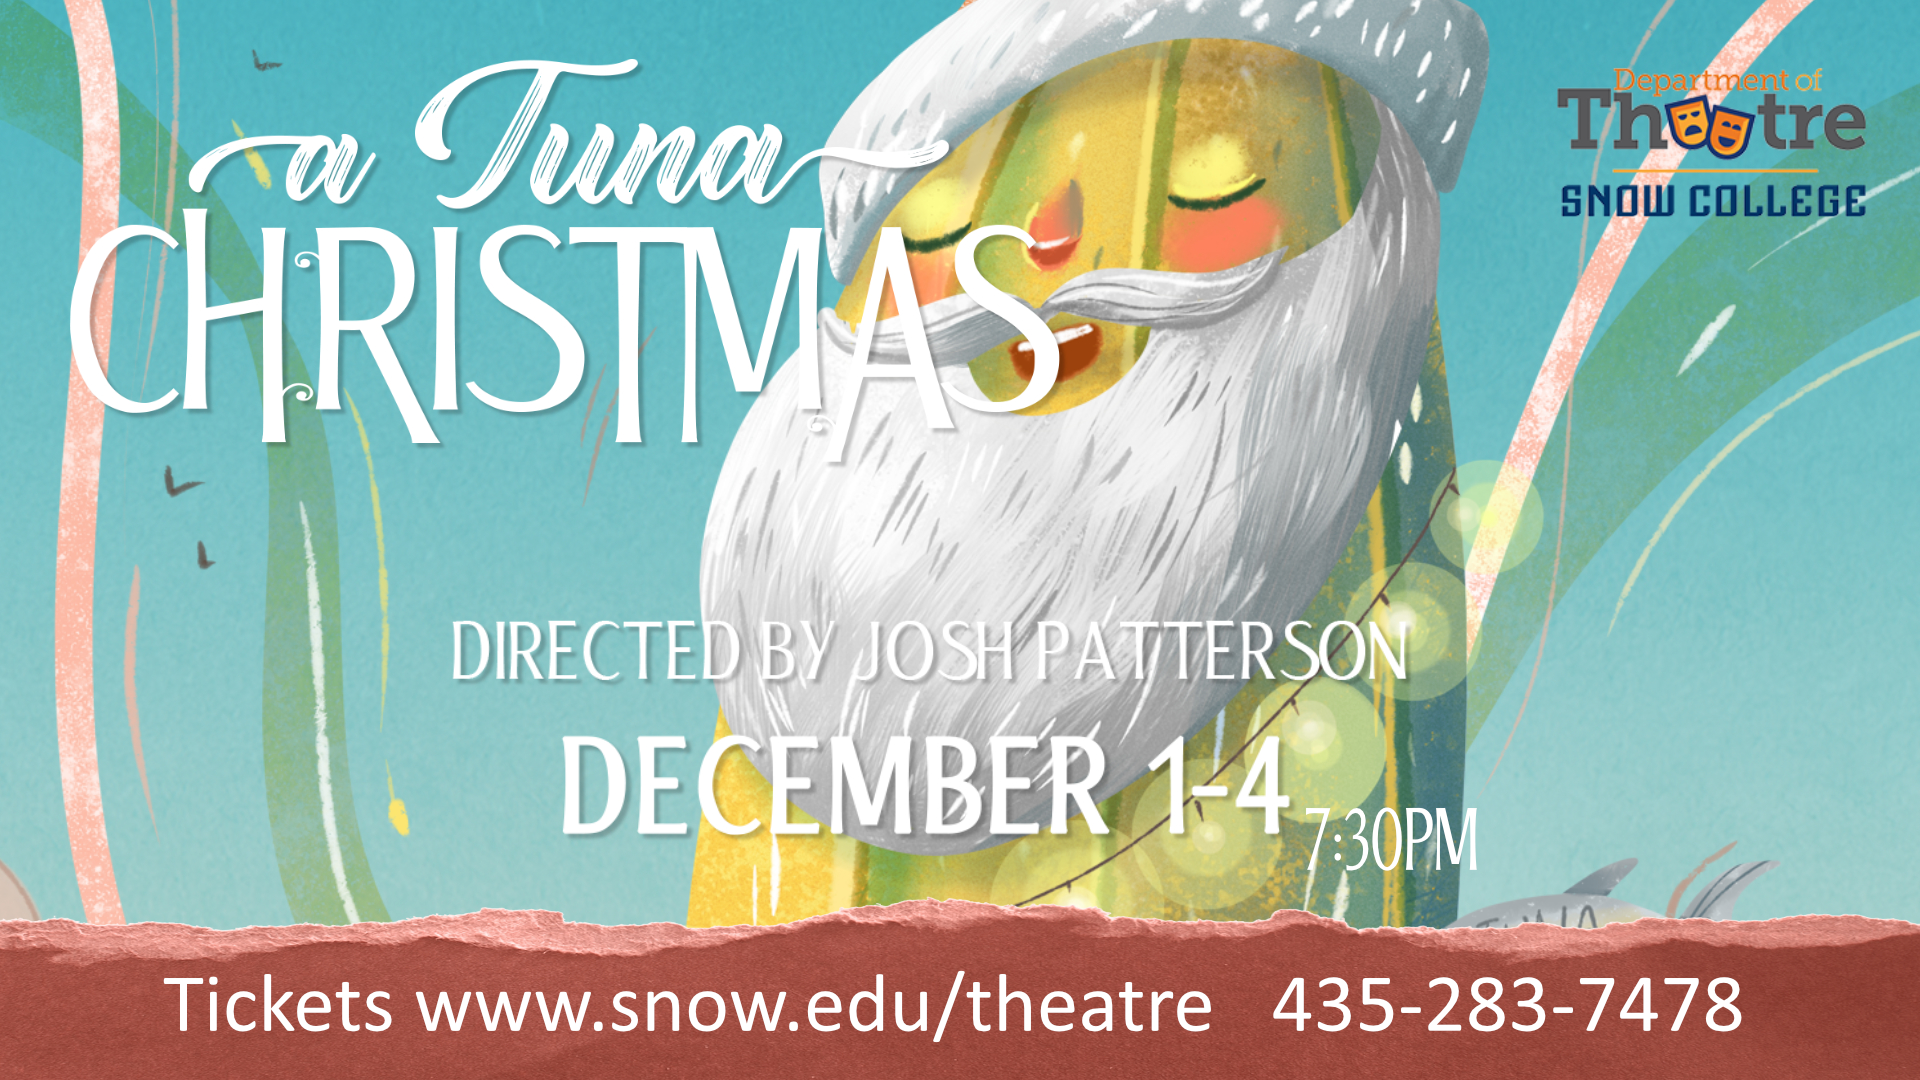 A Tuna Christmas. Directed by Josh Patterson, December 1 thru 4, 7:30pm Tickets at www.snow.edu/theatre 435-283-7478